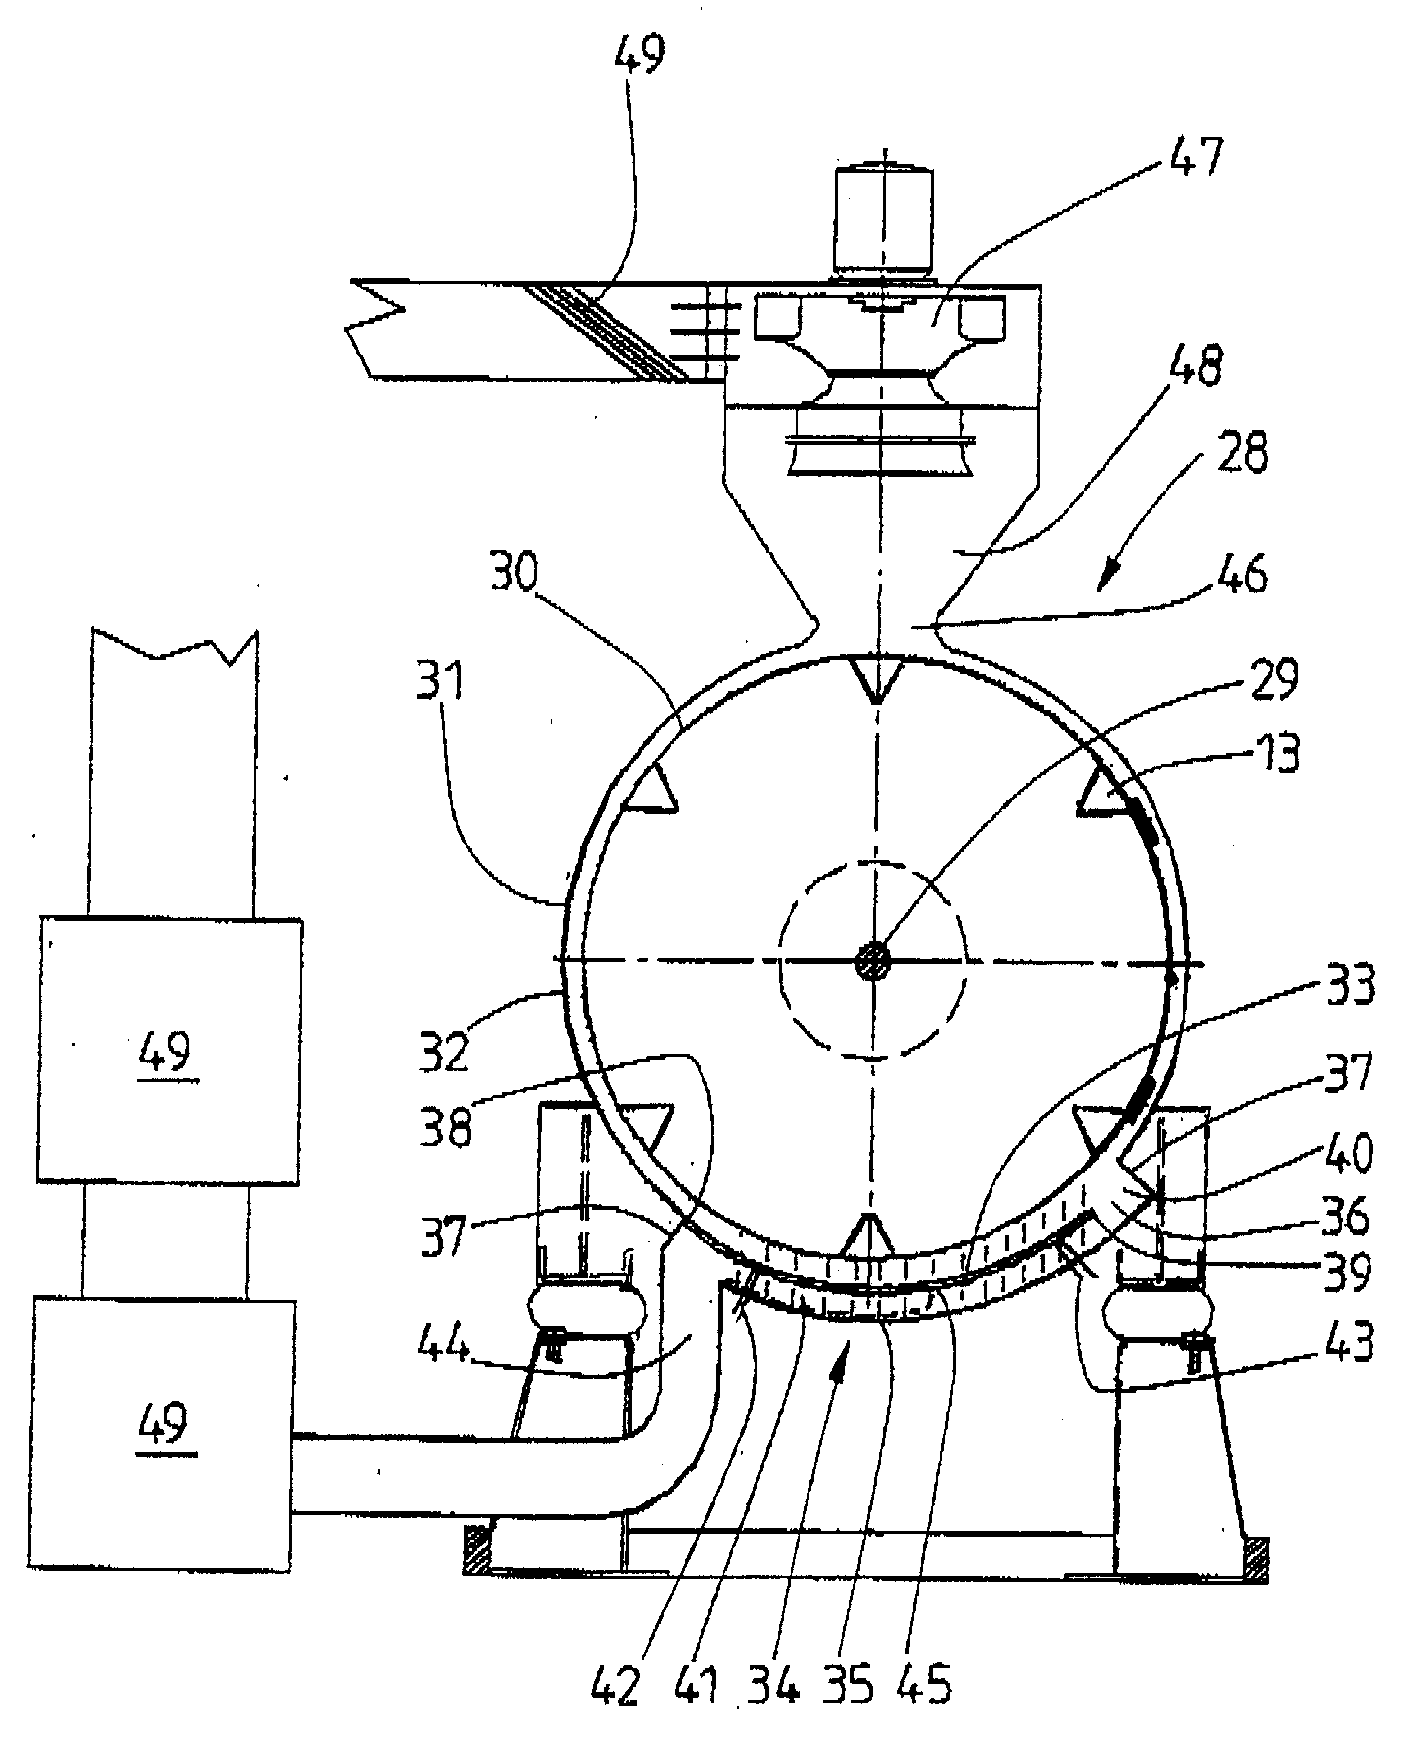 Method and apparatus for treating, preferably washing, spinning and/or drying, laundry